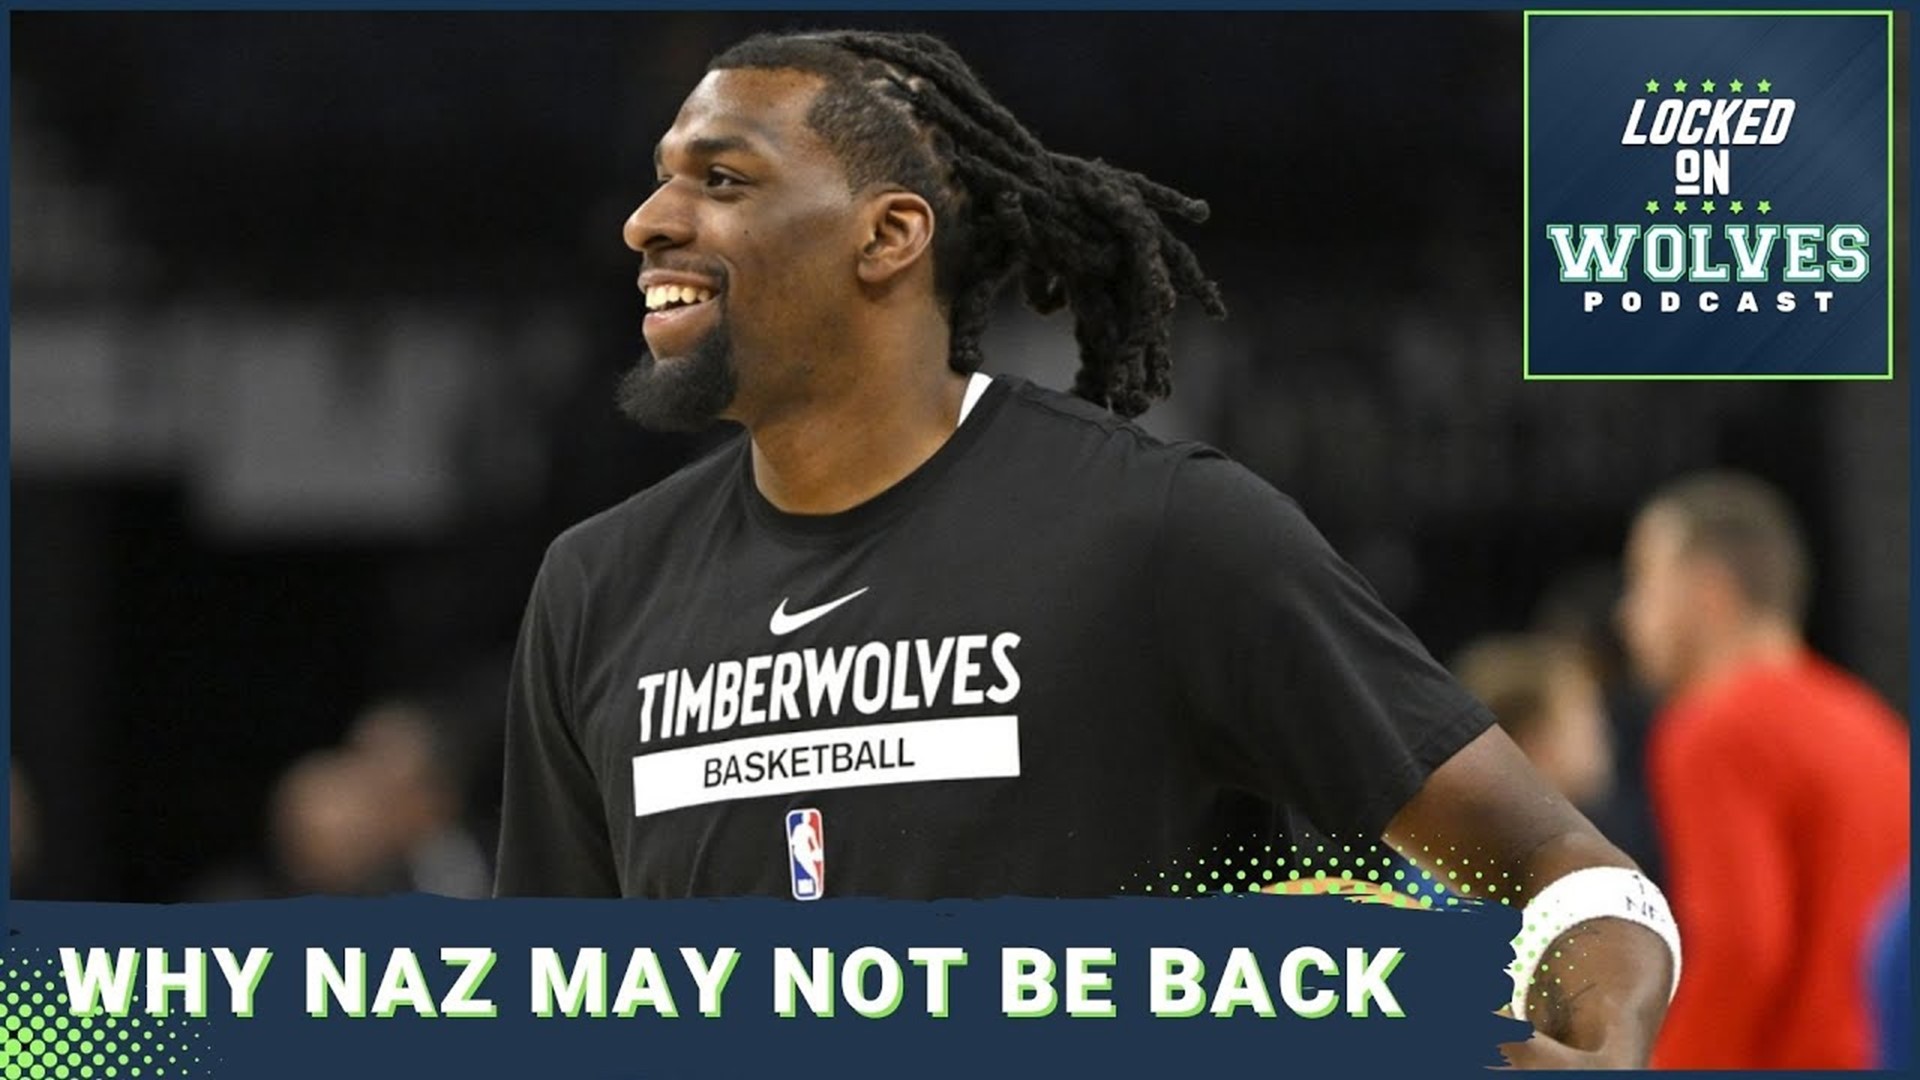 Why free agent Naz Reid seems unlikely to return to the Minnesota Timberwolves